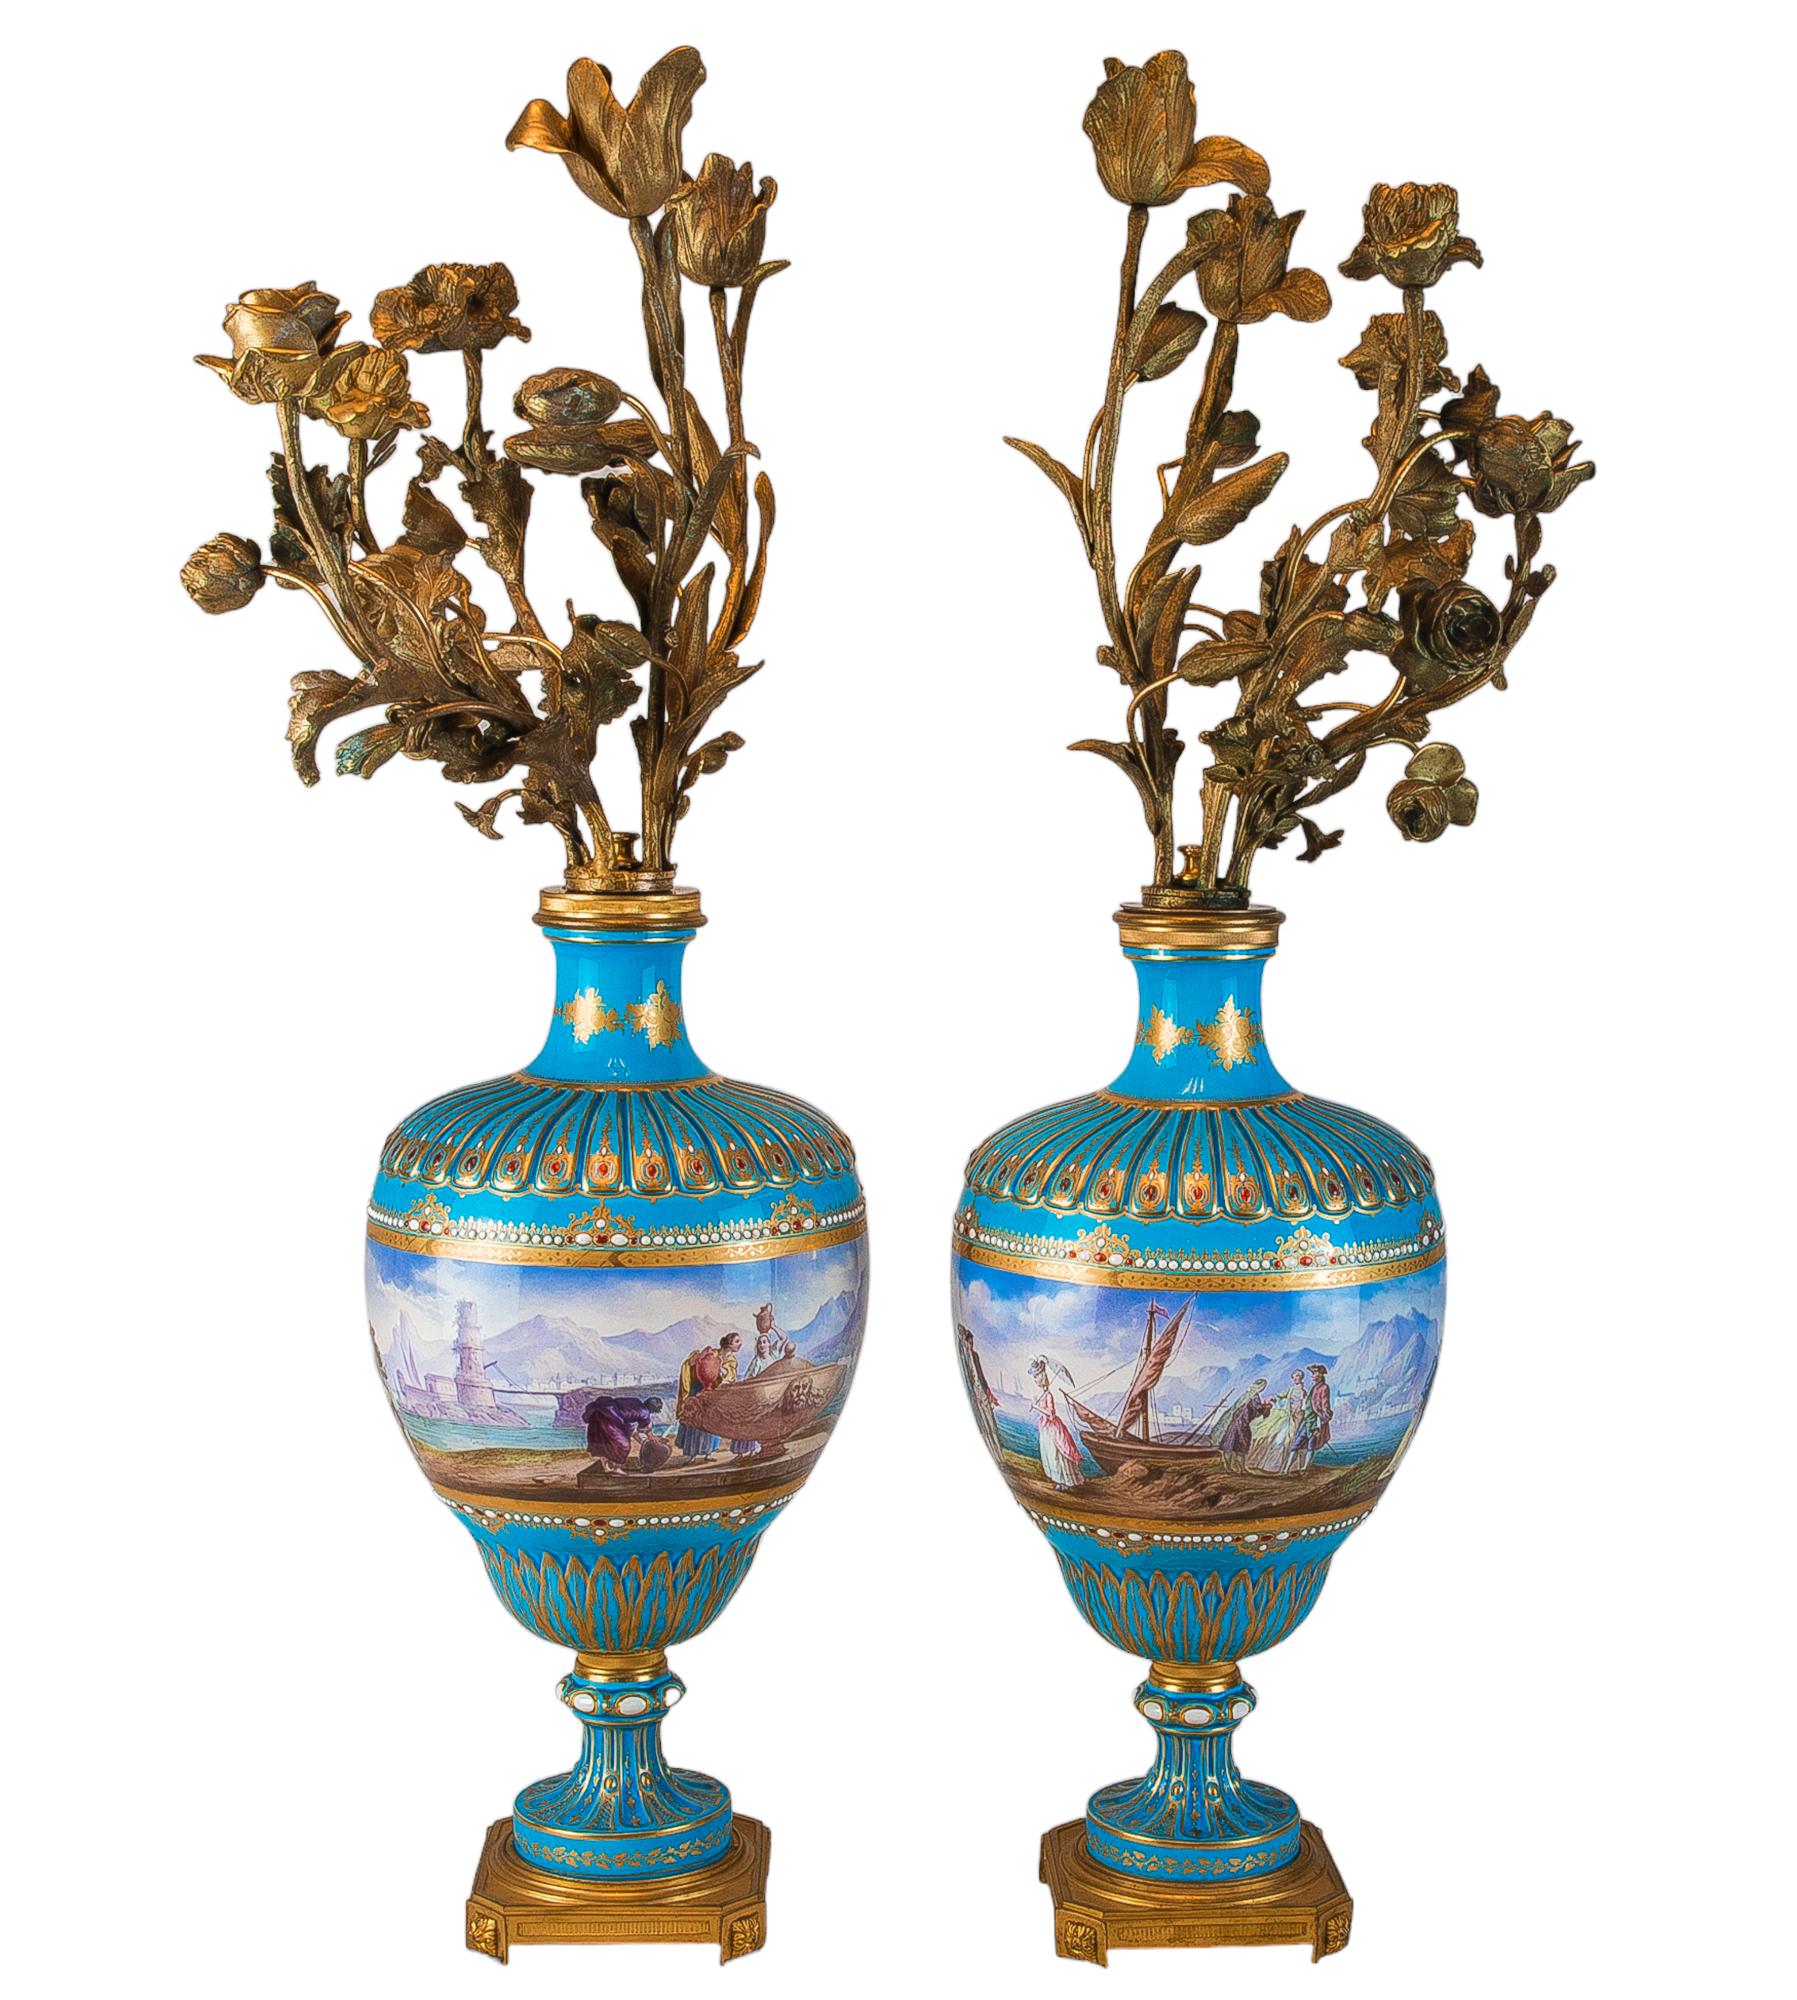 A grand pair of sérves-like turquoise picture vases mounted as five light bouquet candelabras. Hand painted with scenes of a quaint European port town in the 18th century. Each vase showcases a figure group on each face, with one depicting the daily